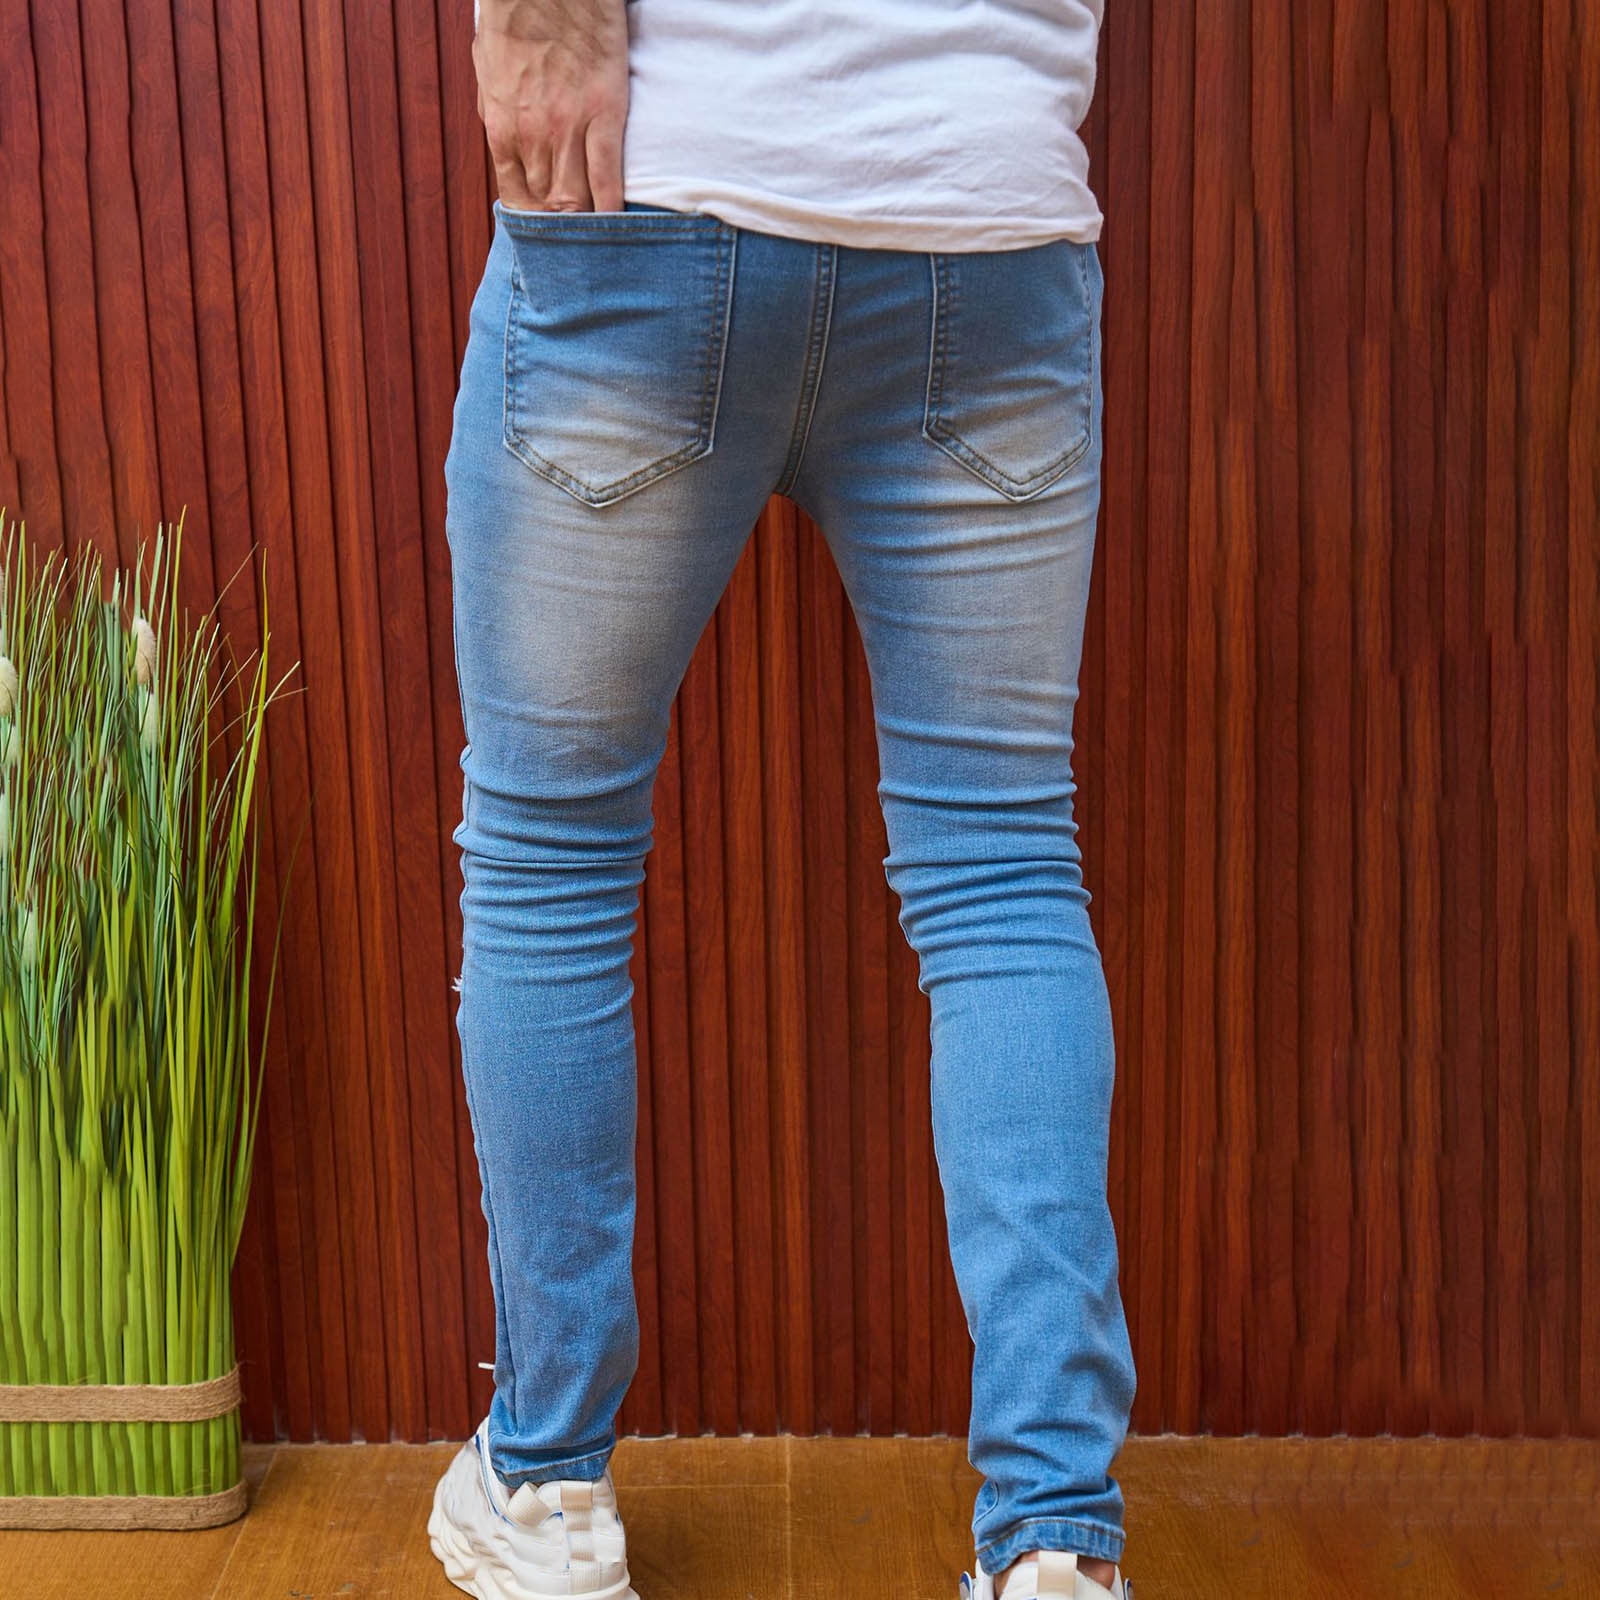 TheFound Men's Jeans Ripped Slim Fit Jeans Stretch Distressed Destroyed  Skinny Zipper Straight Leg Denim Pants Light Blue S